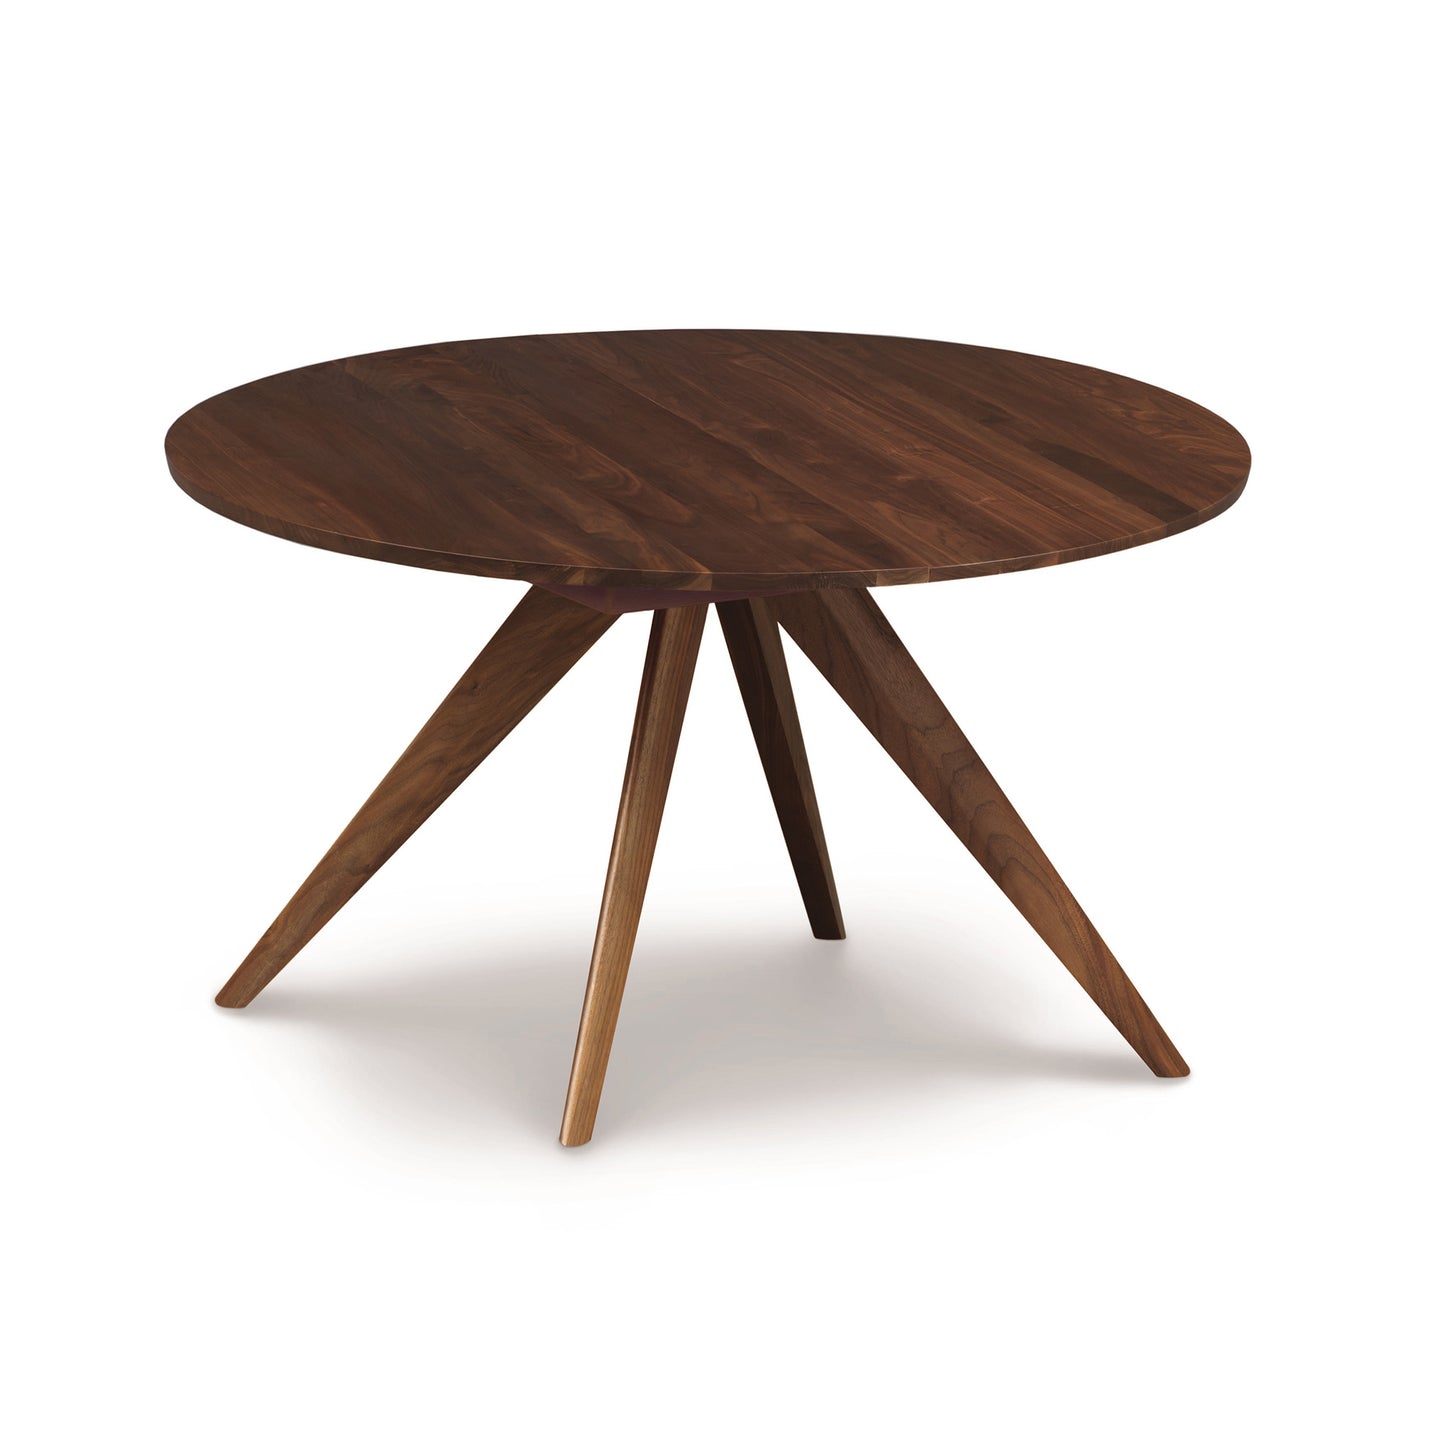 A Catalina round extension table with tapered legs on a white background, crafted from solid North American wood by Copeland Furniture.